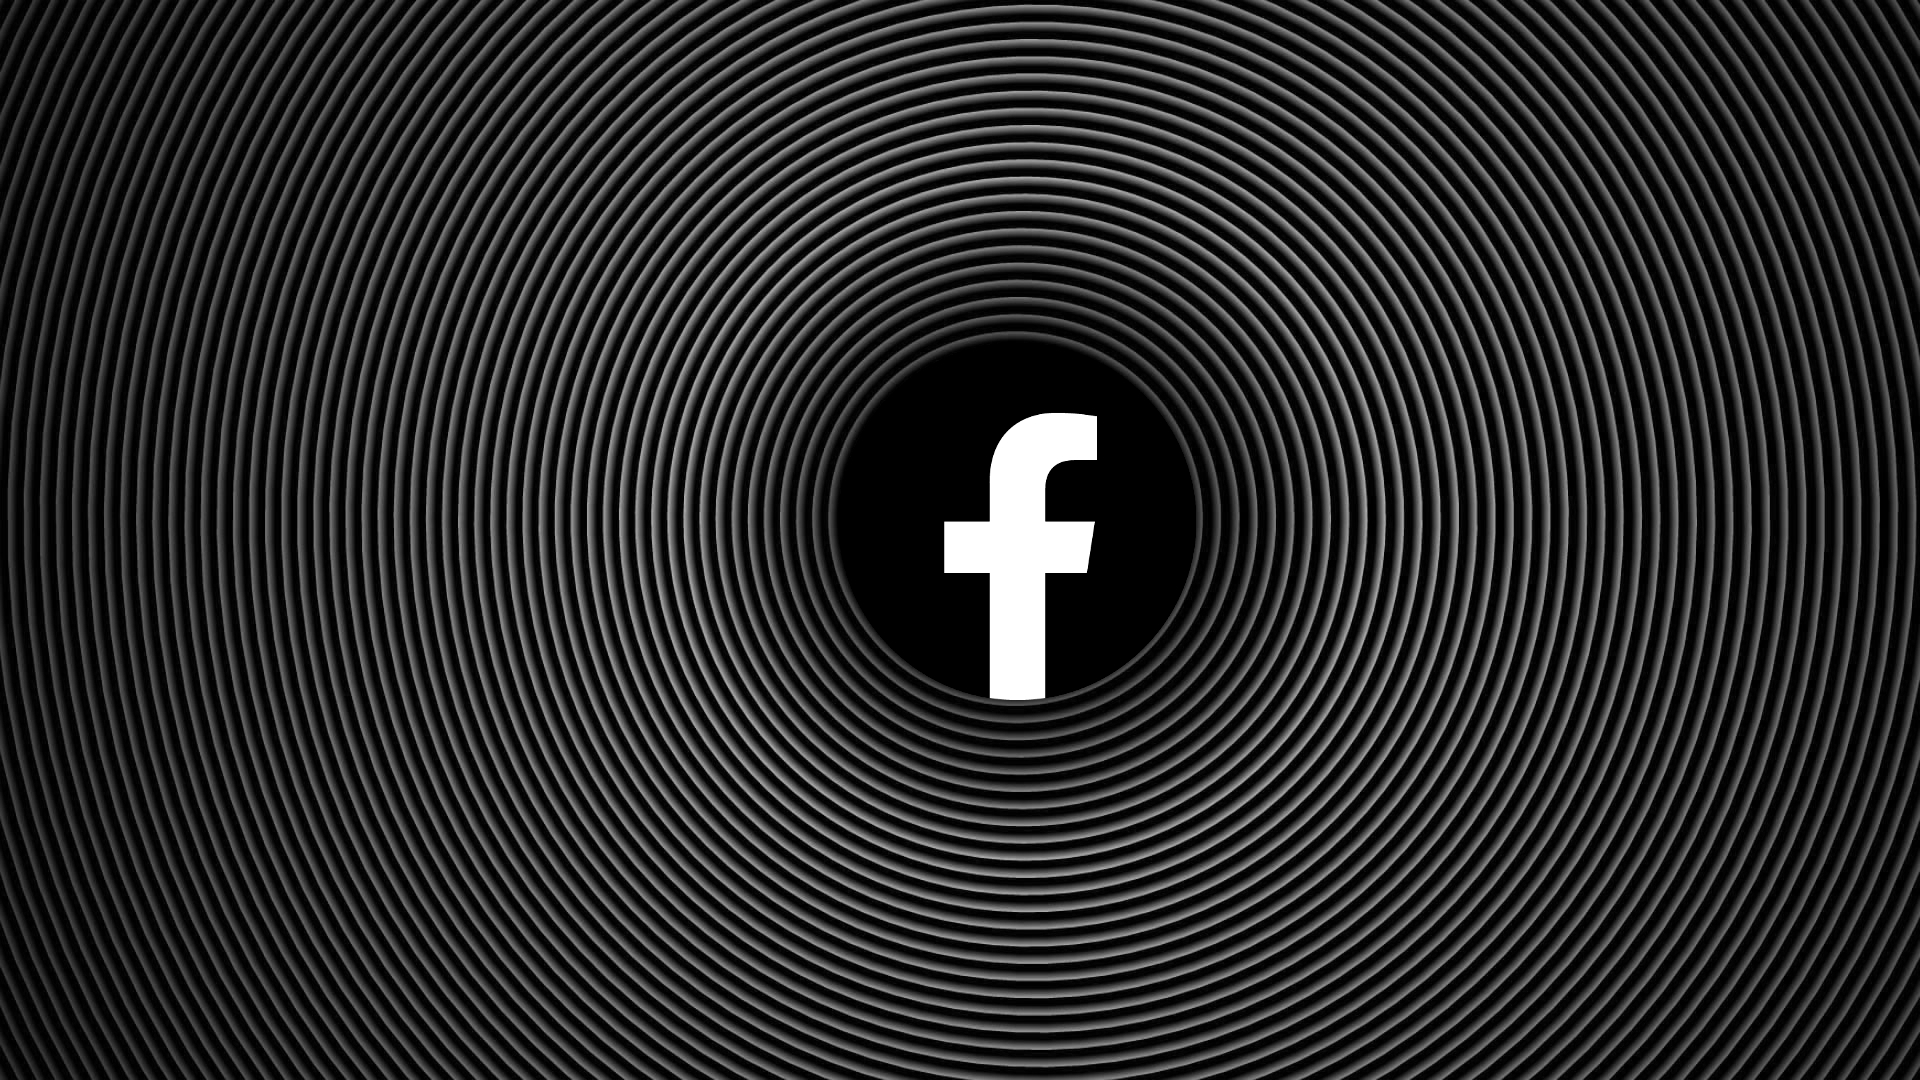 Global blackout: the day Facebook's monopoly became obvious thumbnail